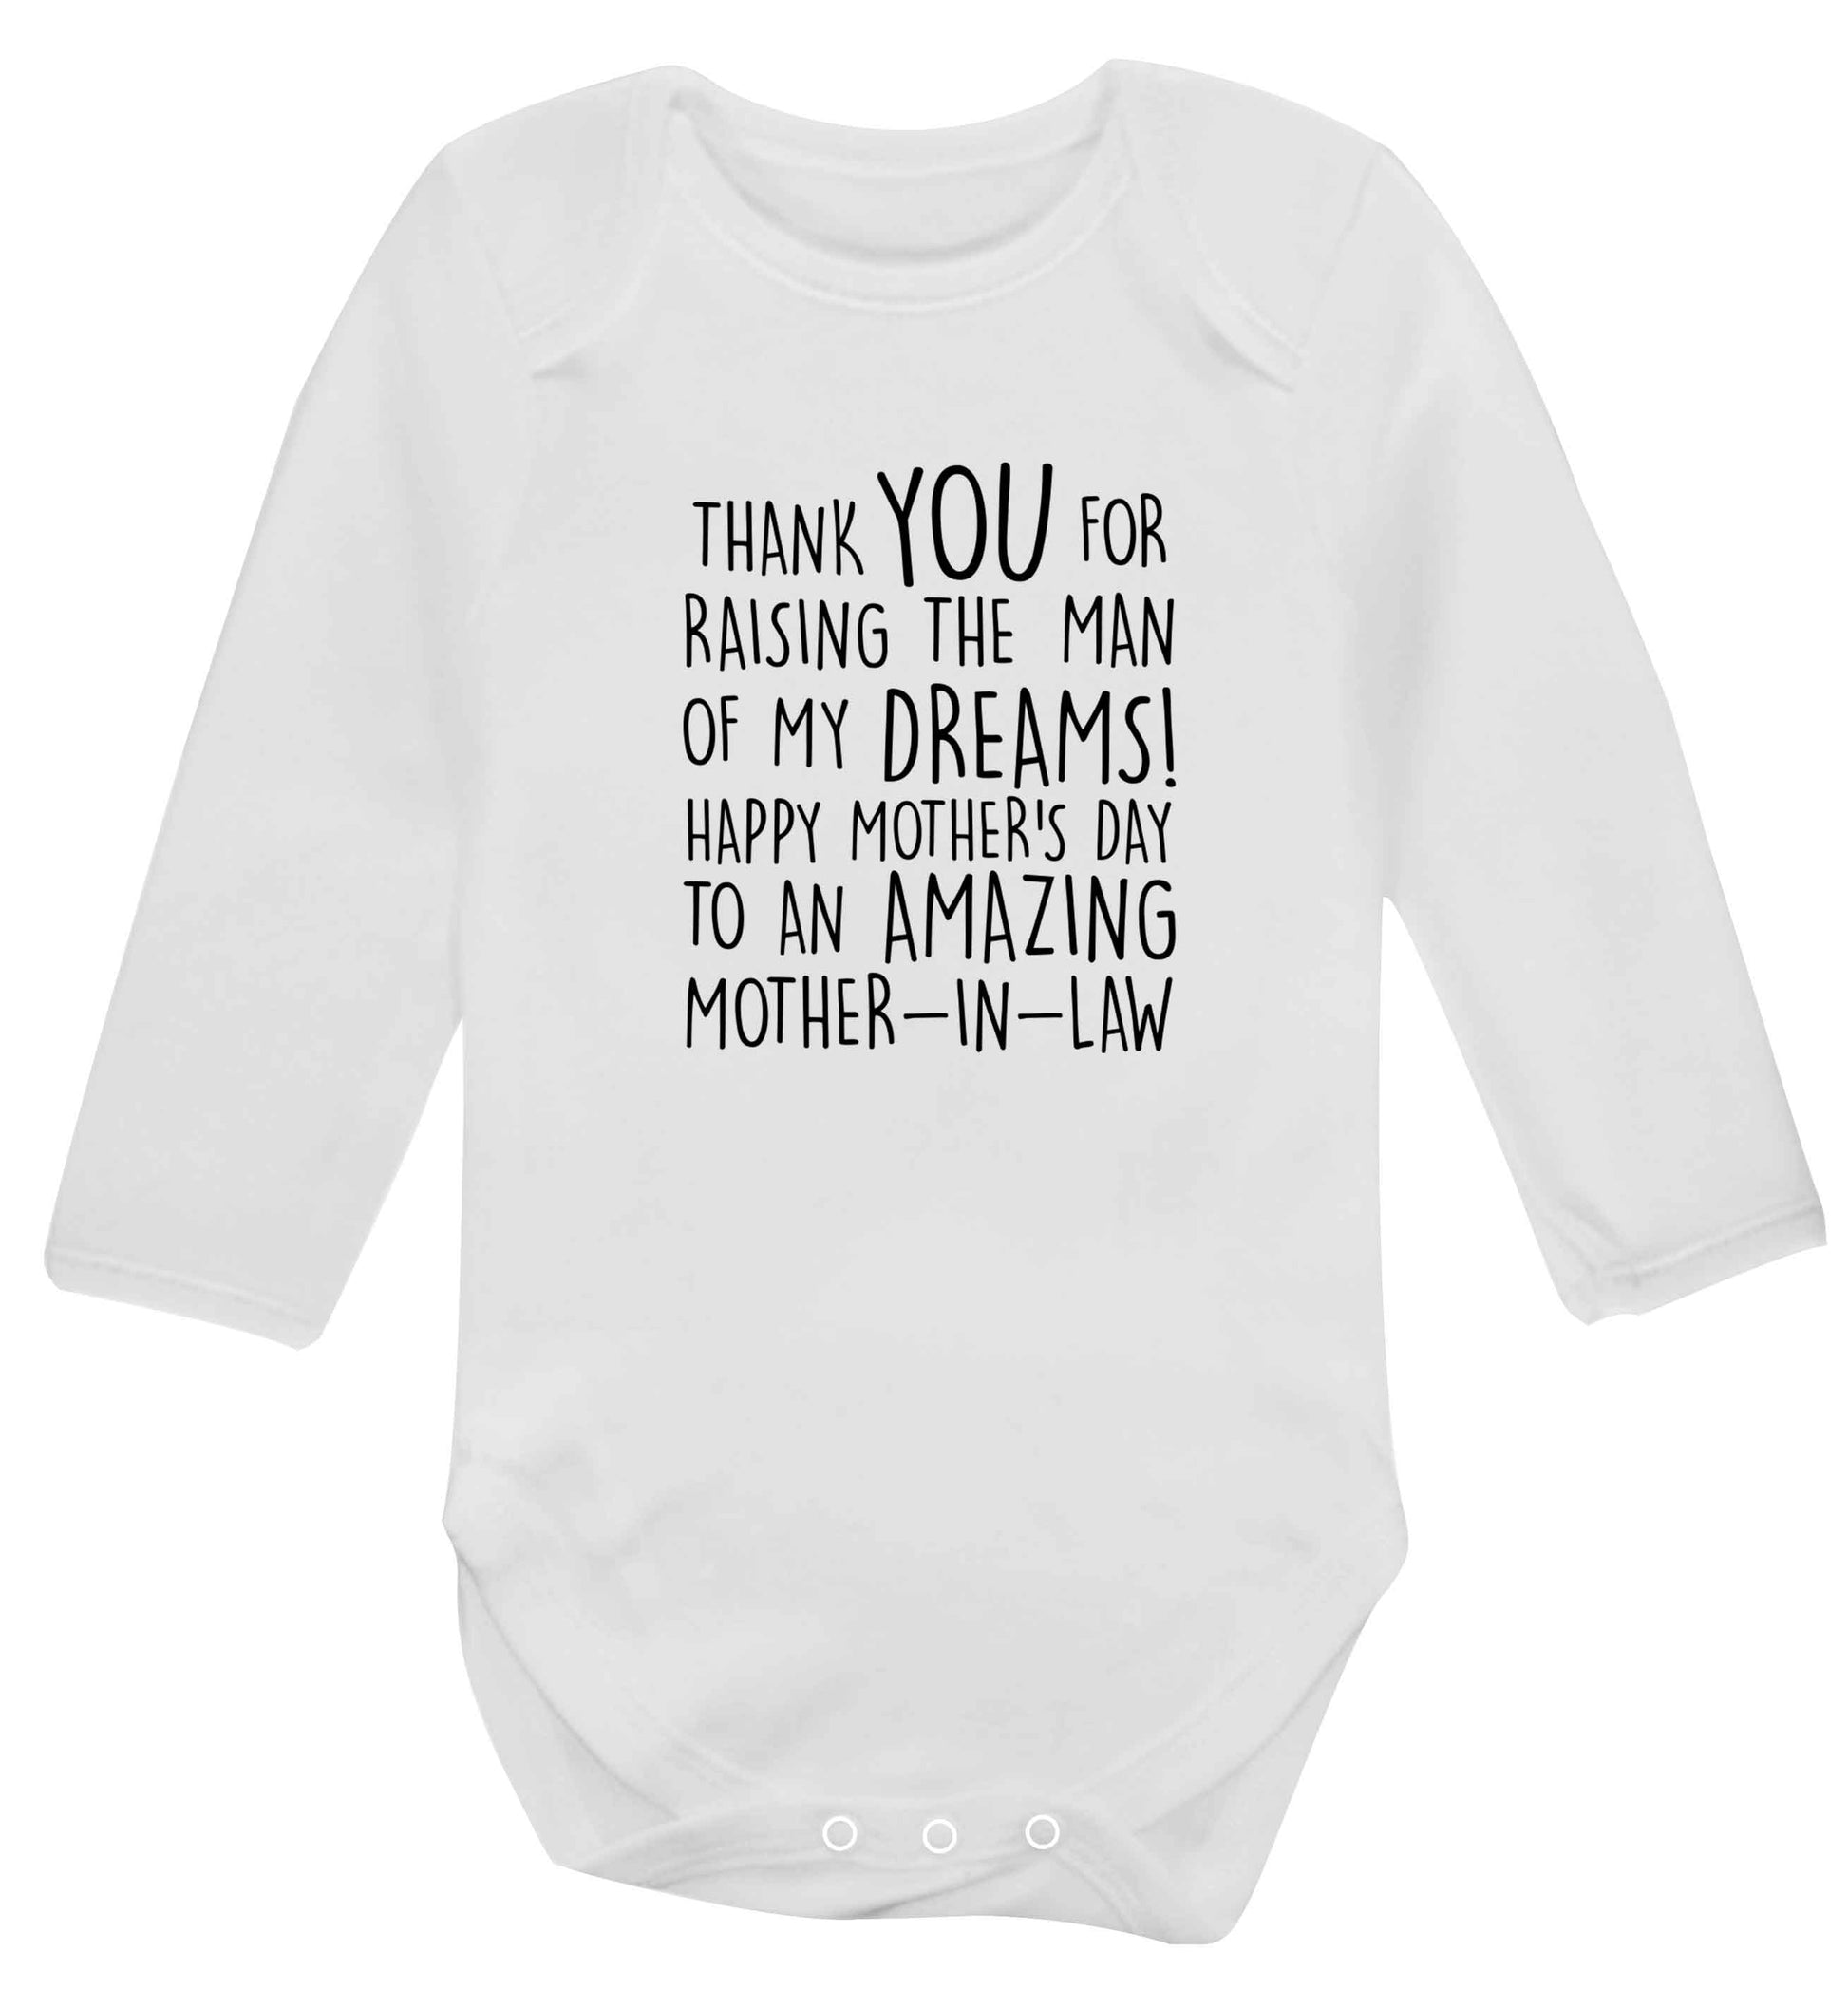 Raising the man of my dreams mother's day mother-in-law baby vest long sleeved white 6-12 months